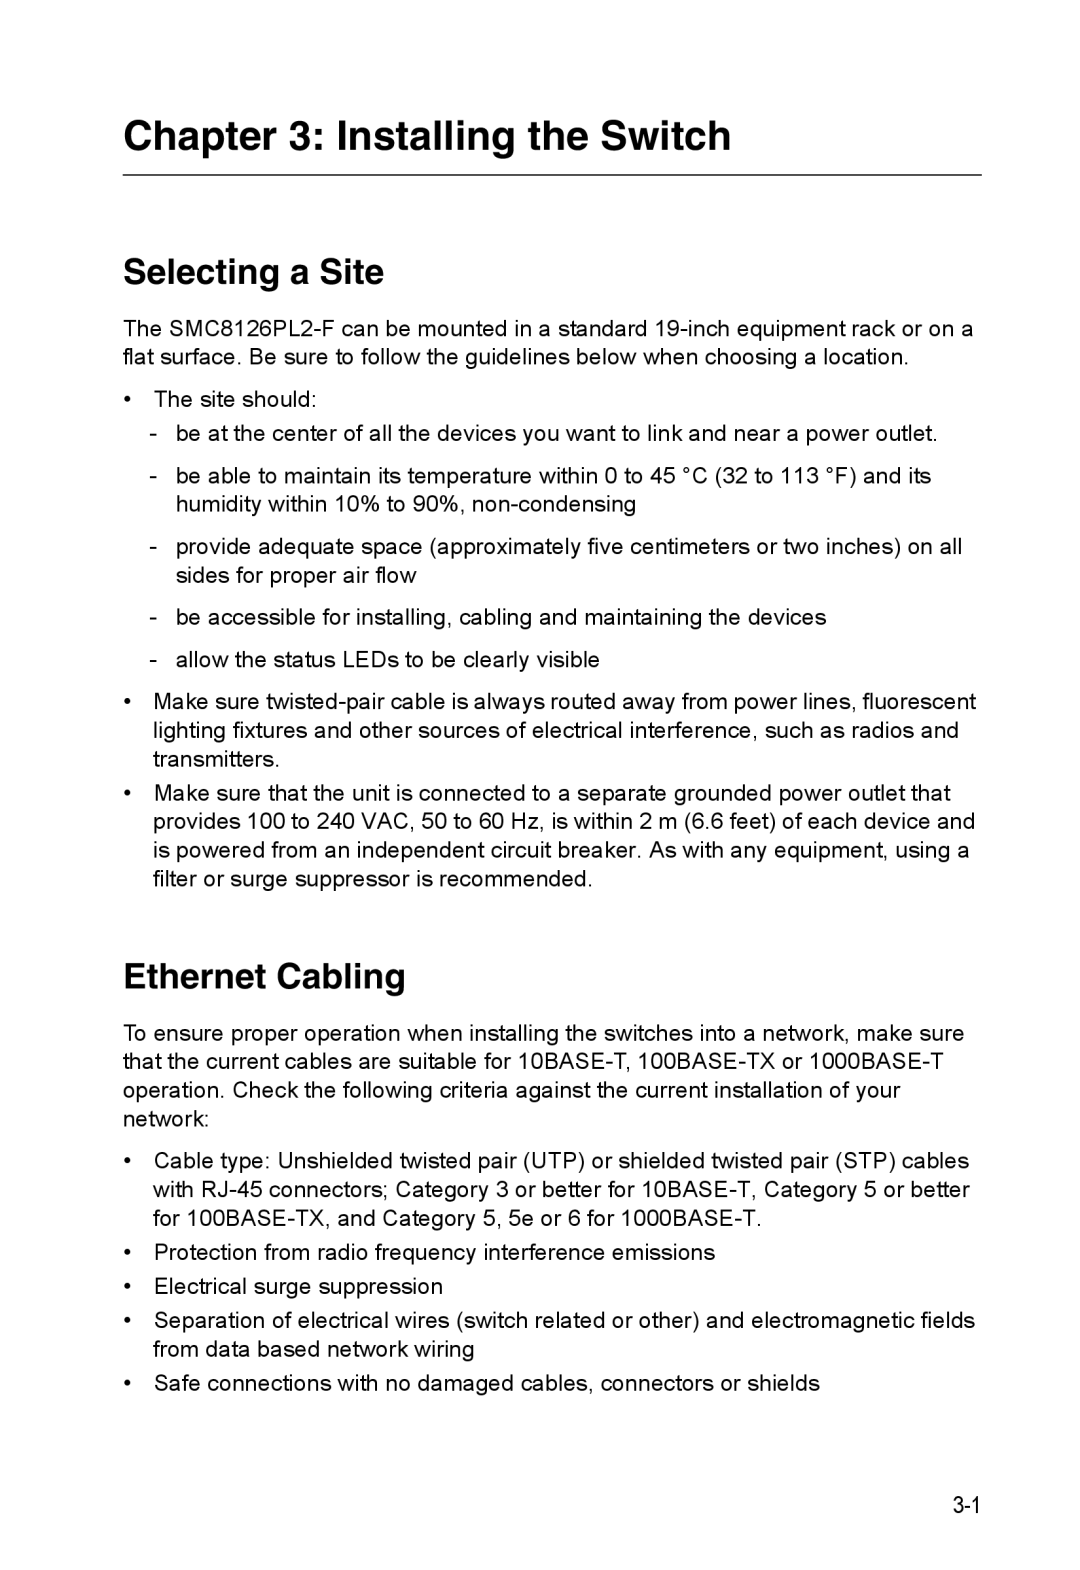 SMC Networks SMC8126PL2-F manual Installing the Switch, Selecting a Site, Ethernet Cabling 